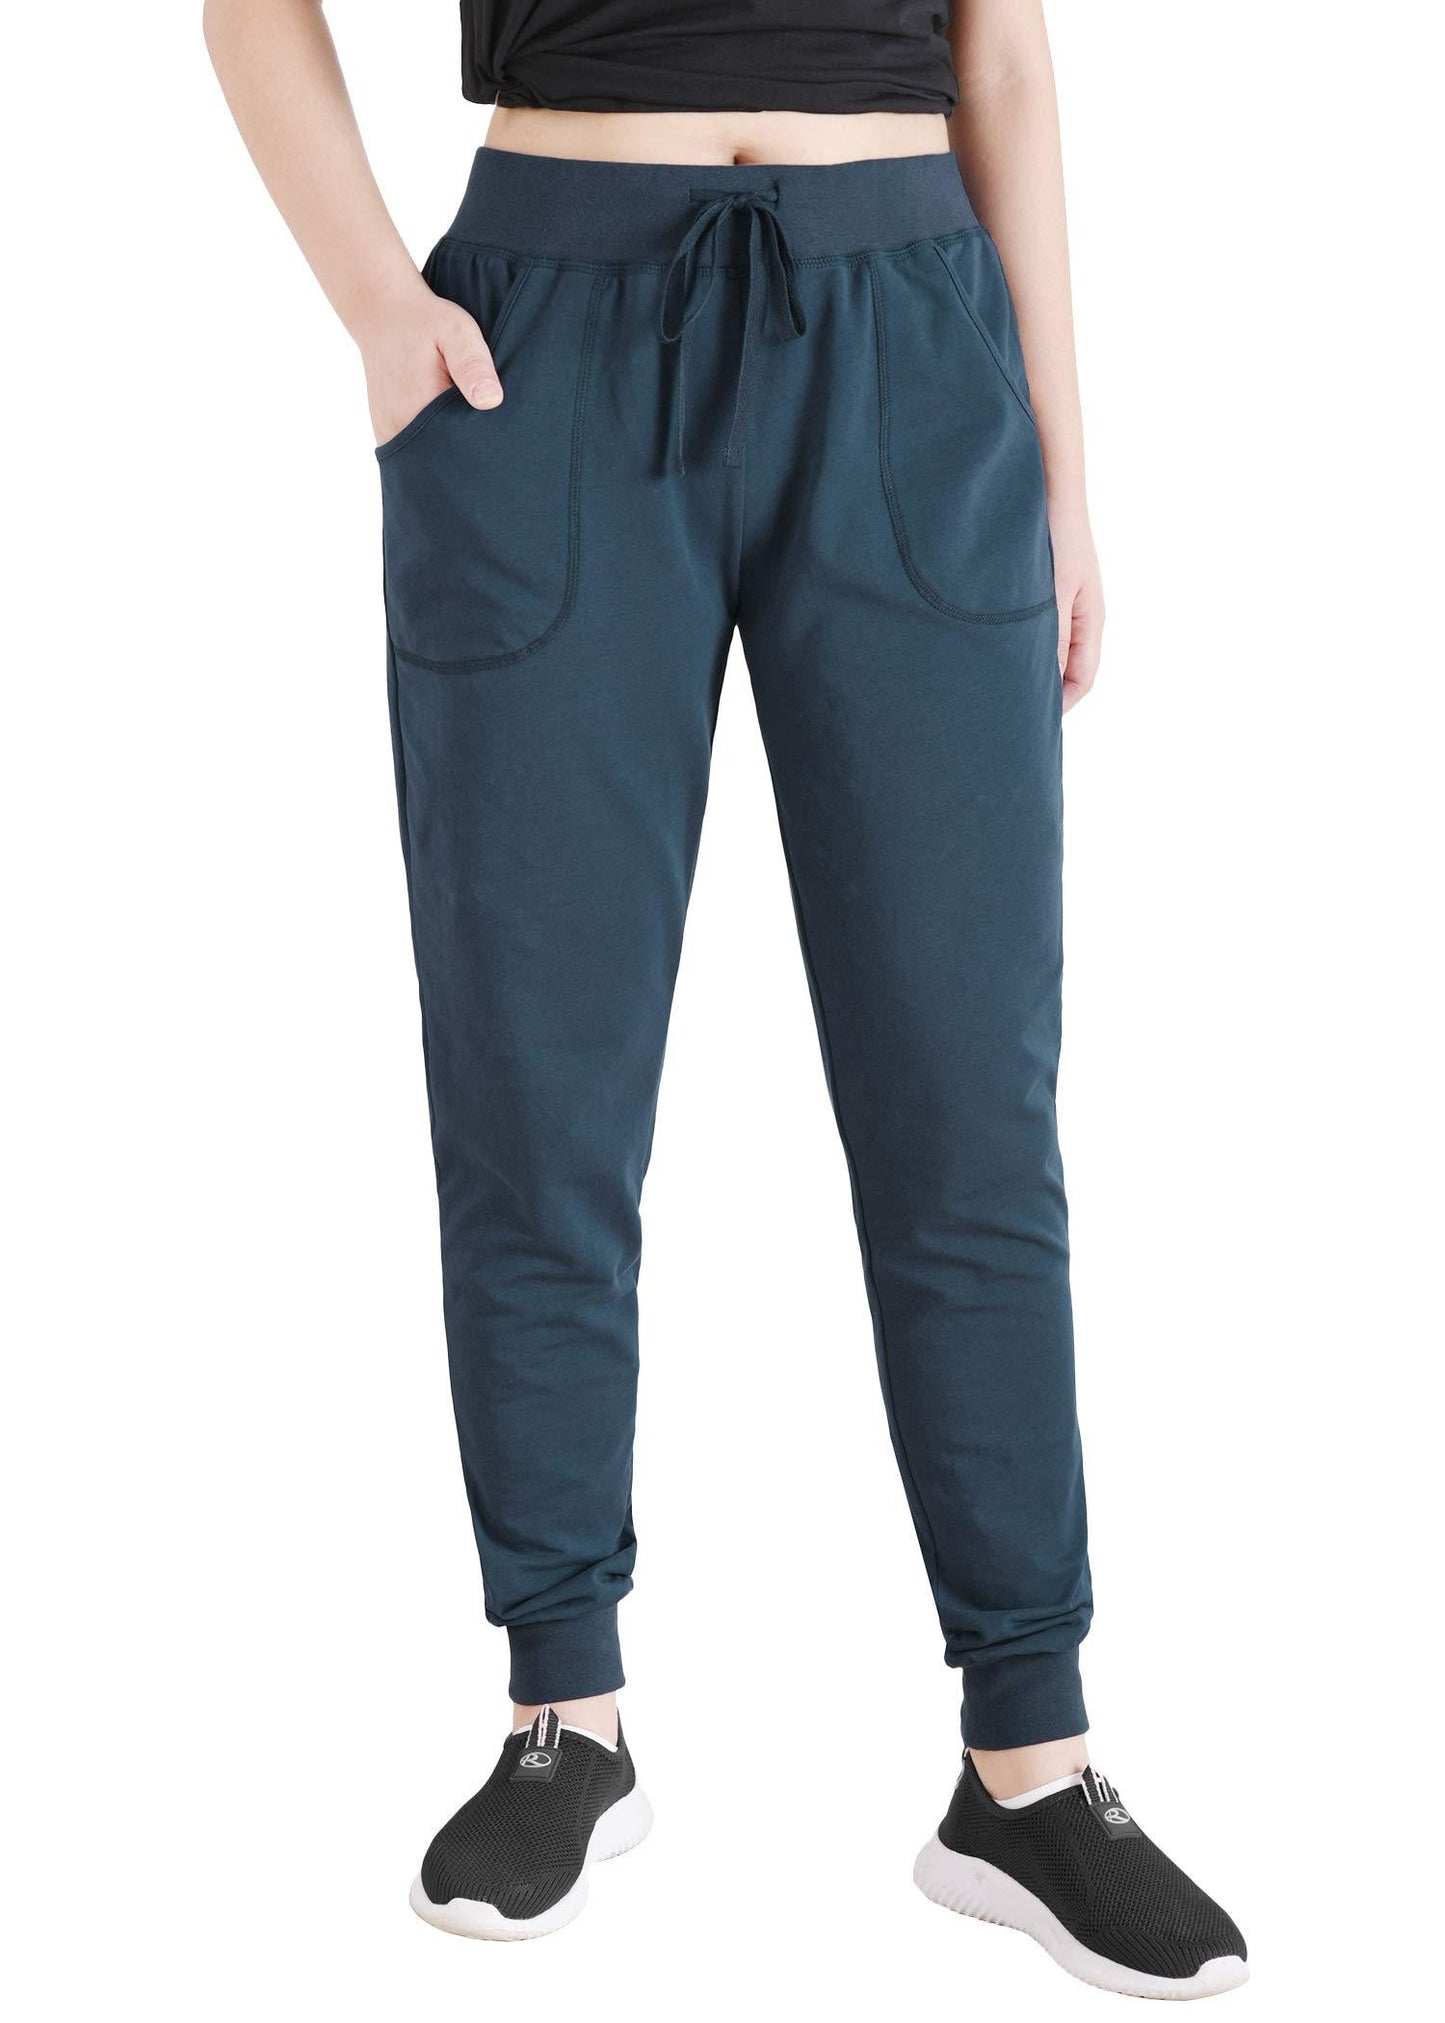 EHQJNJ Cotton Joggers for Women with Pockets Women Removable